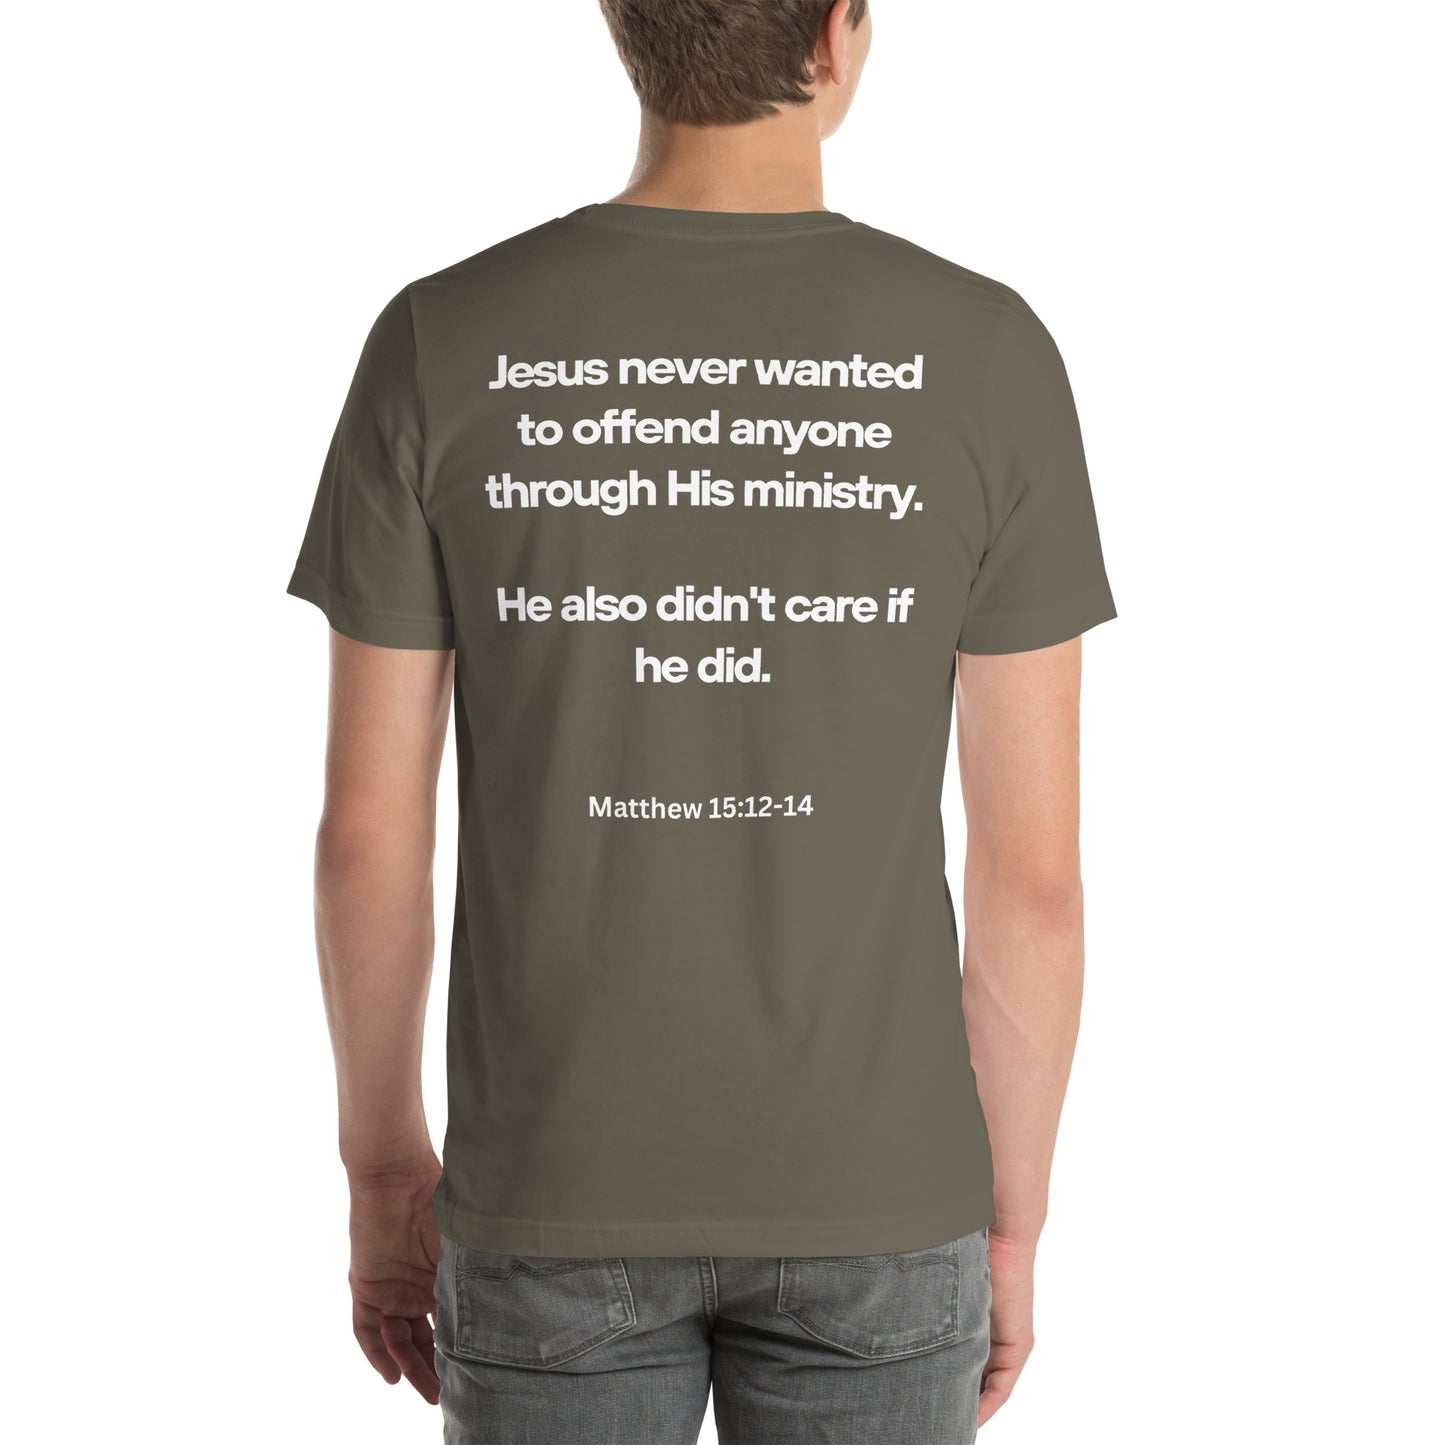 Unapologetic Ministry Tee